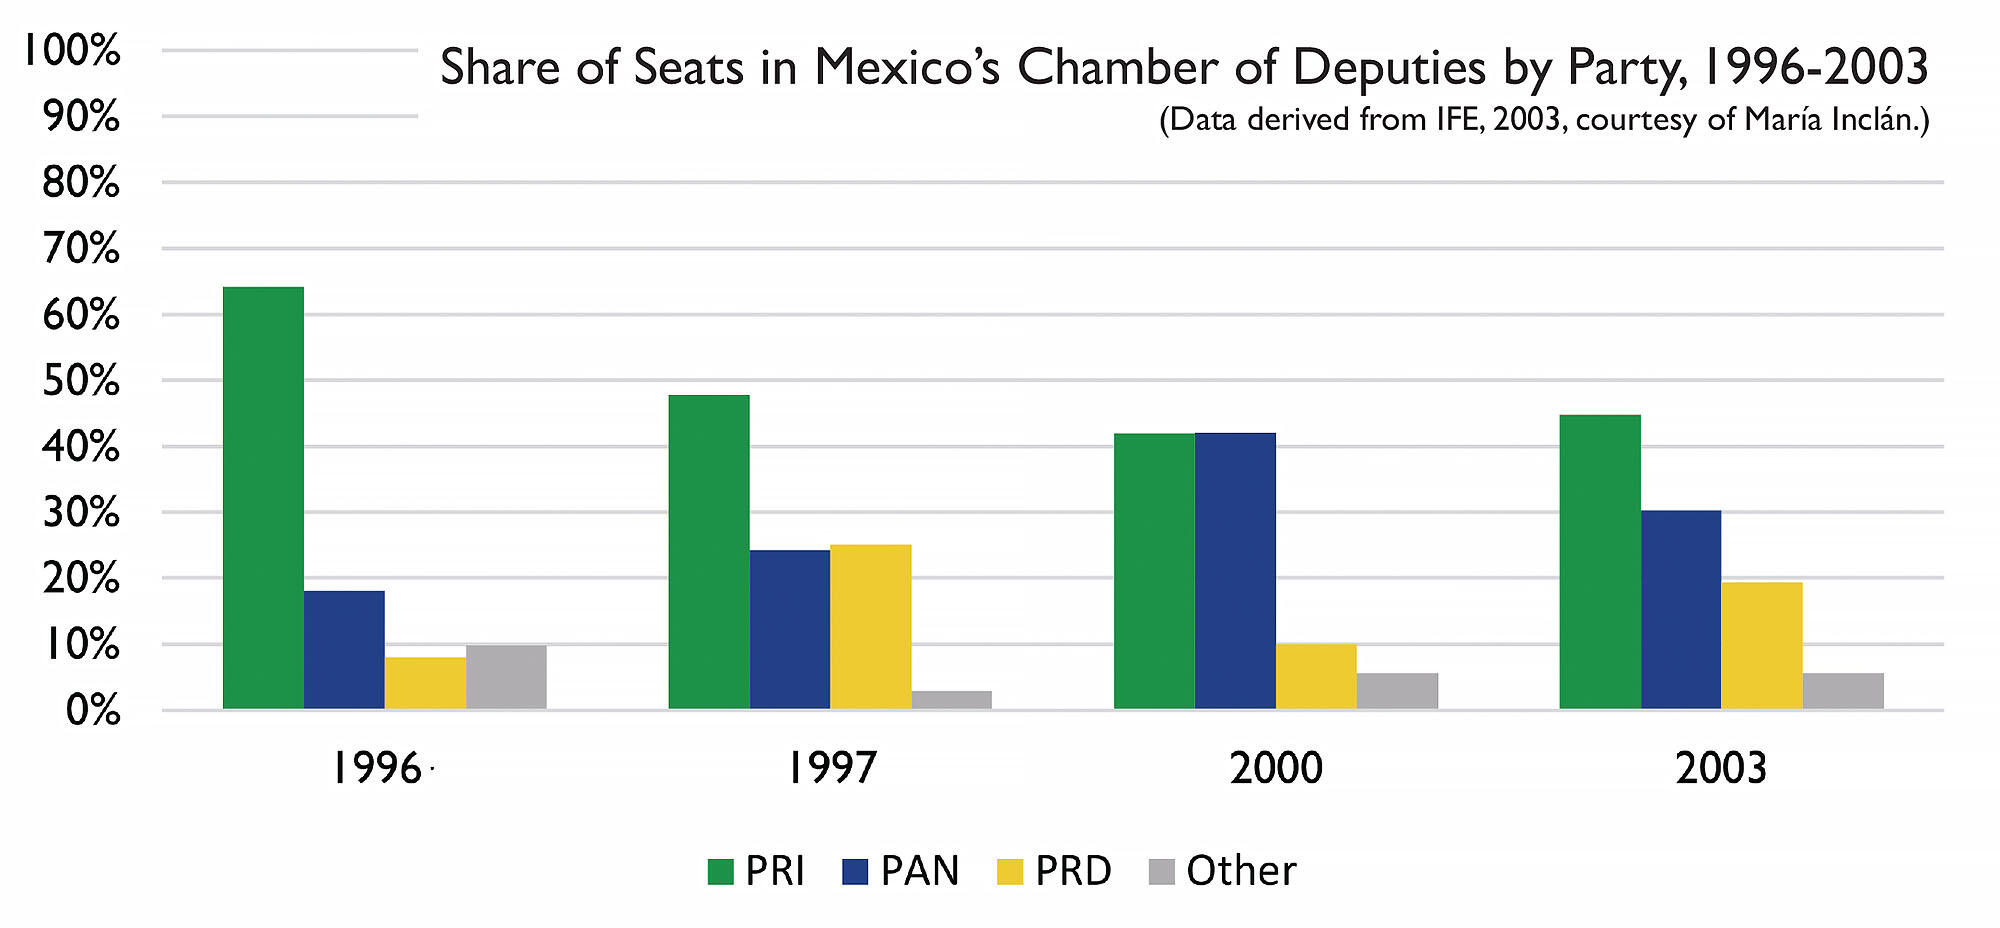 Share of Seats in Mexico’s Chamber of Deputies by Party, 1996-2003 (Data derived from IFE, 2003, courtesy of María Inclán.)